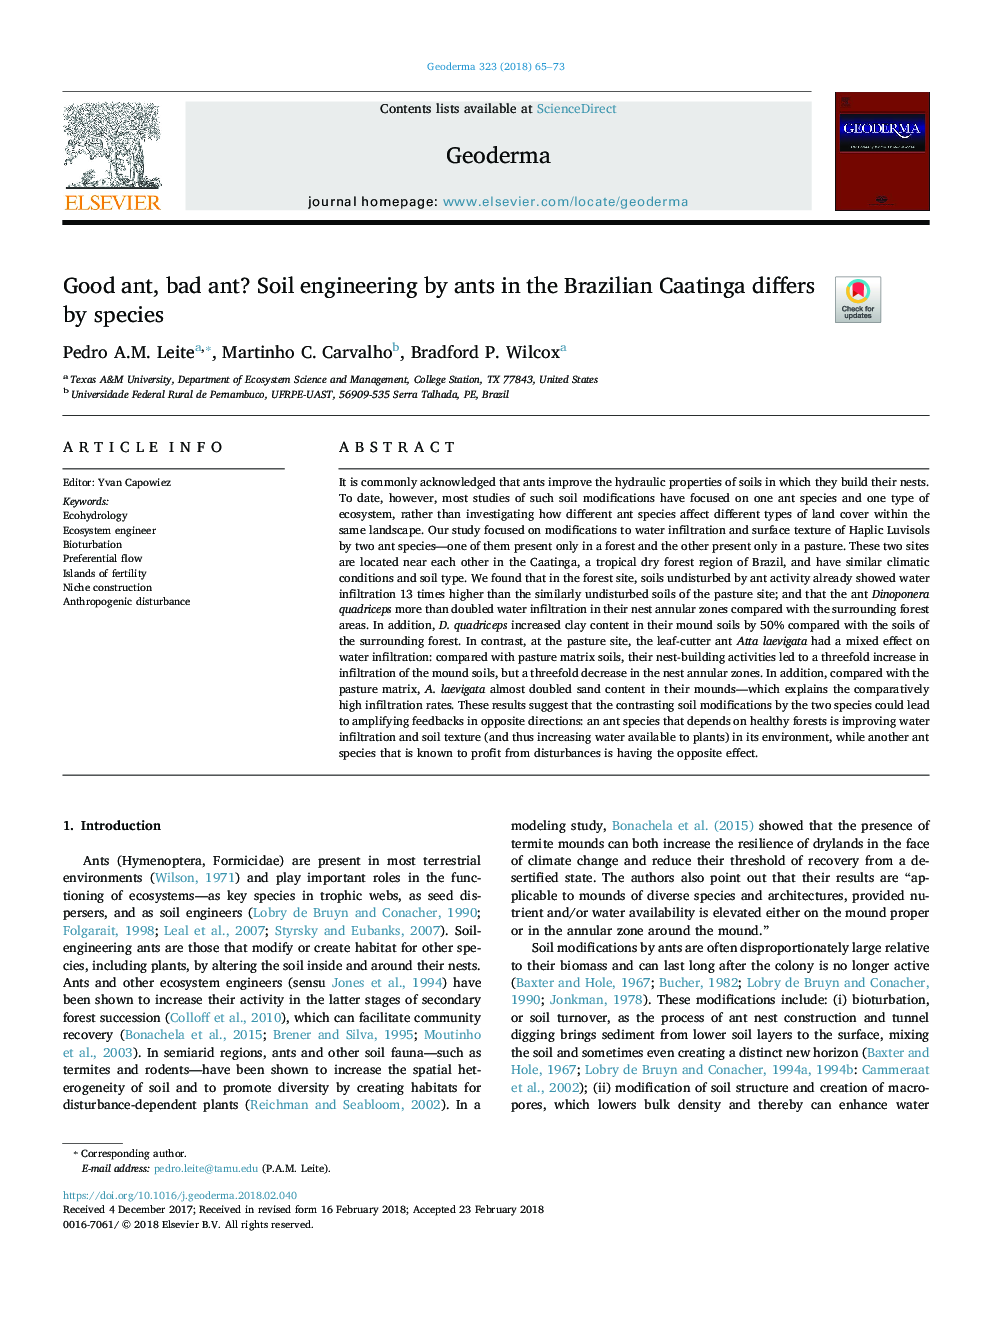 Good ant, bad ant? Soil engineering by ants in the Brazilian Caatinga differs by species